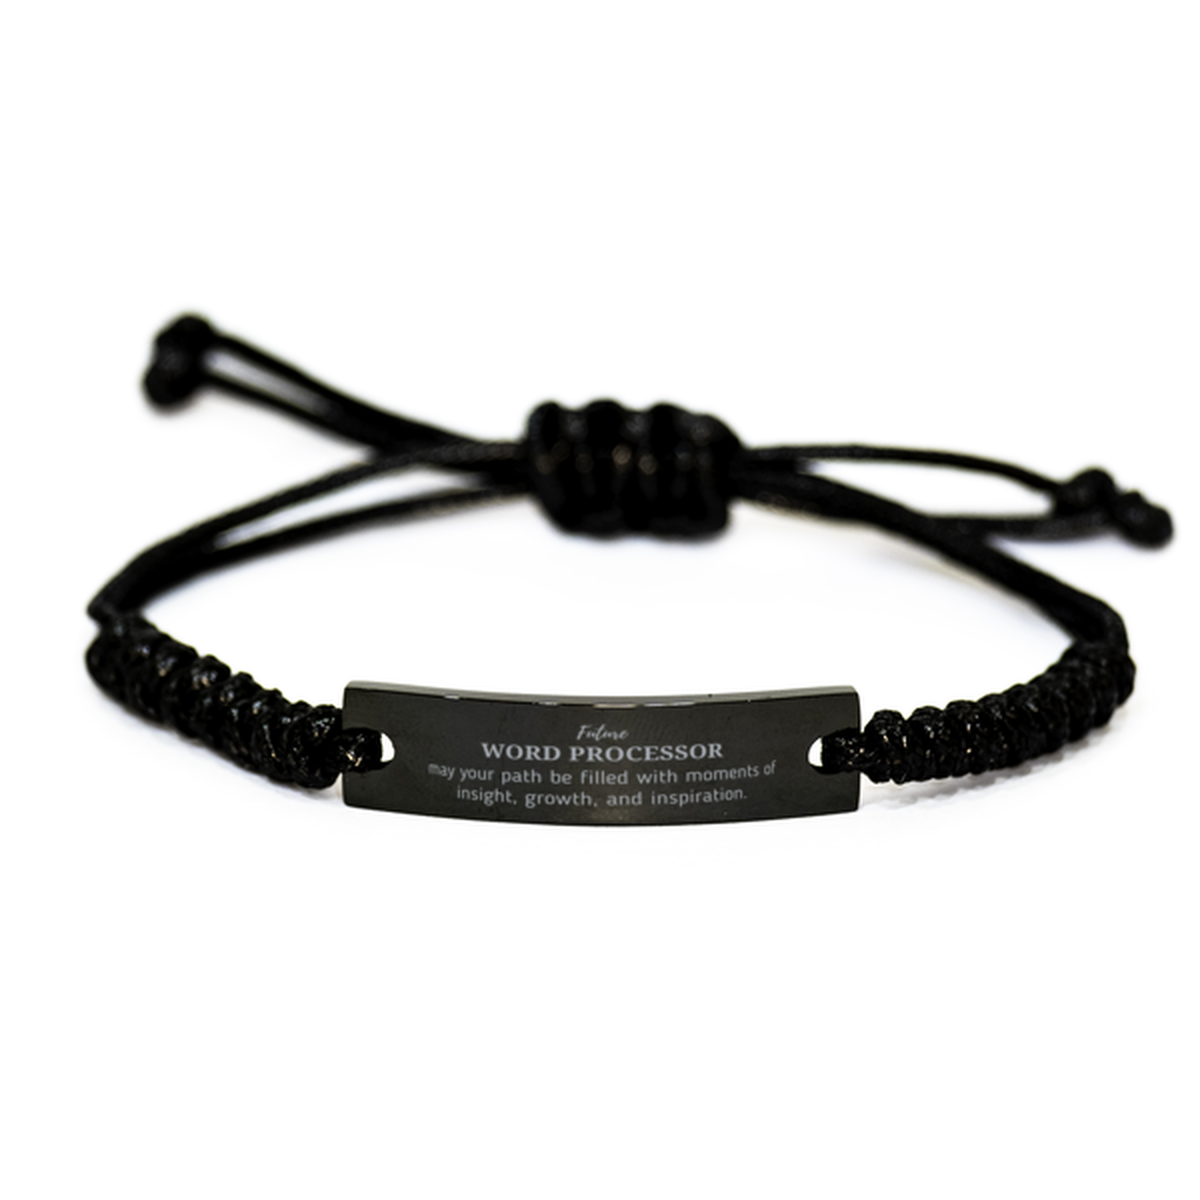 Future Word Processor Gifts, May your path be filled with moments of insight, Graduation Gifts for New Word Processor, Christmas Unique Black Rope Bracelet For Men, Women, Friends